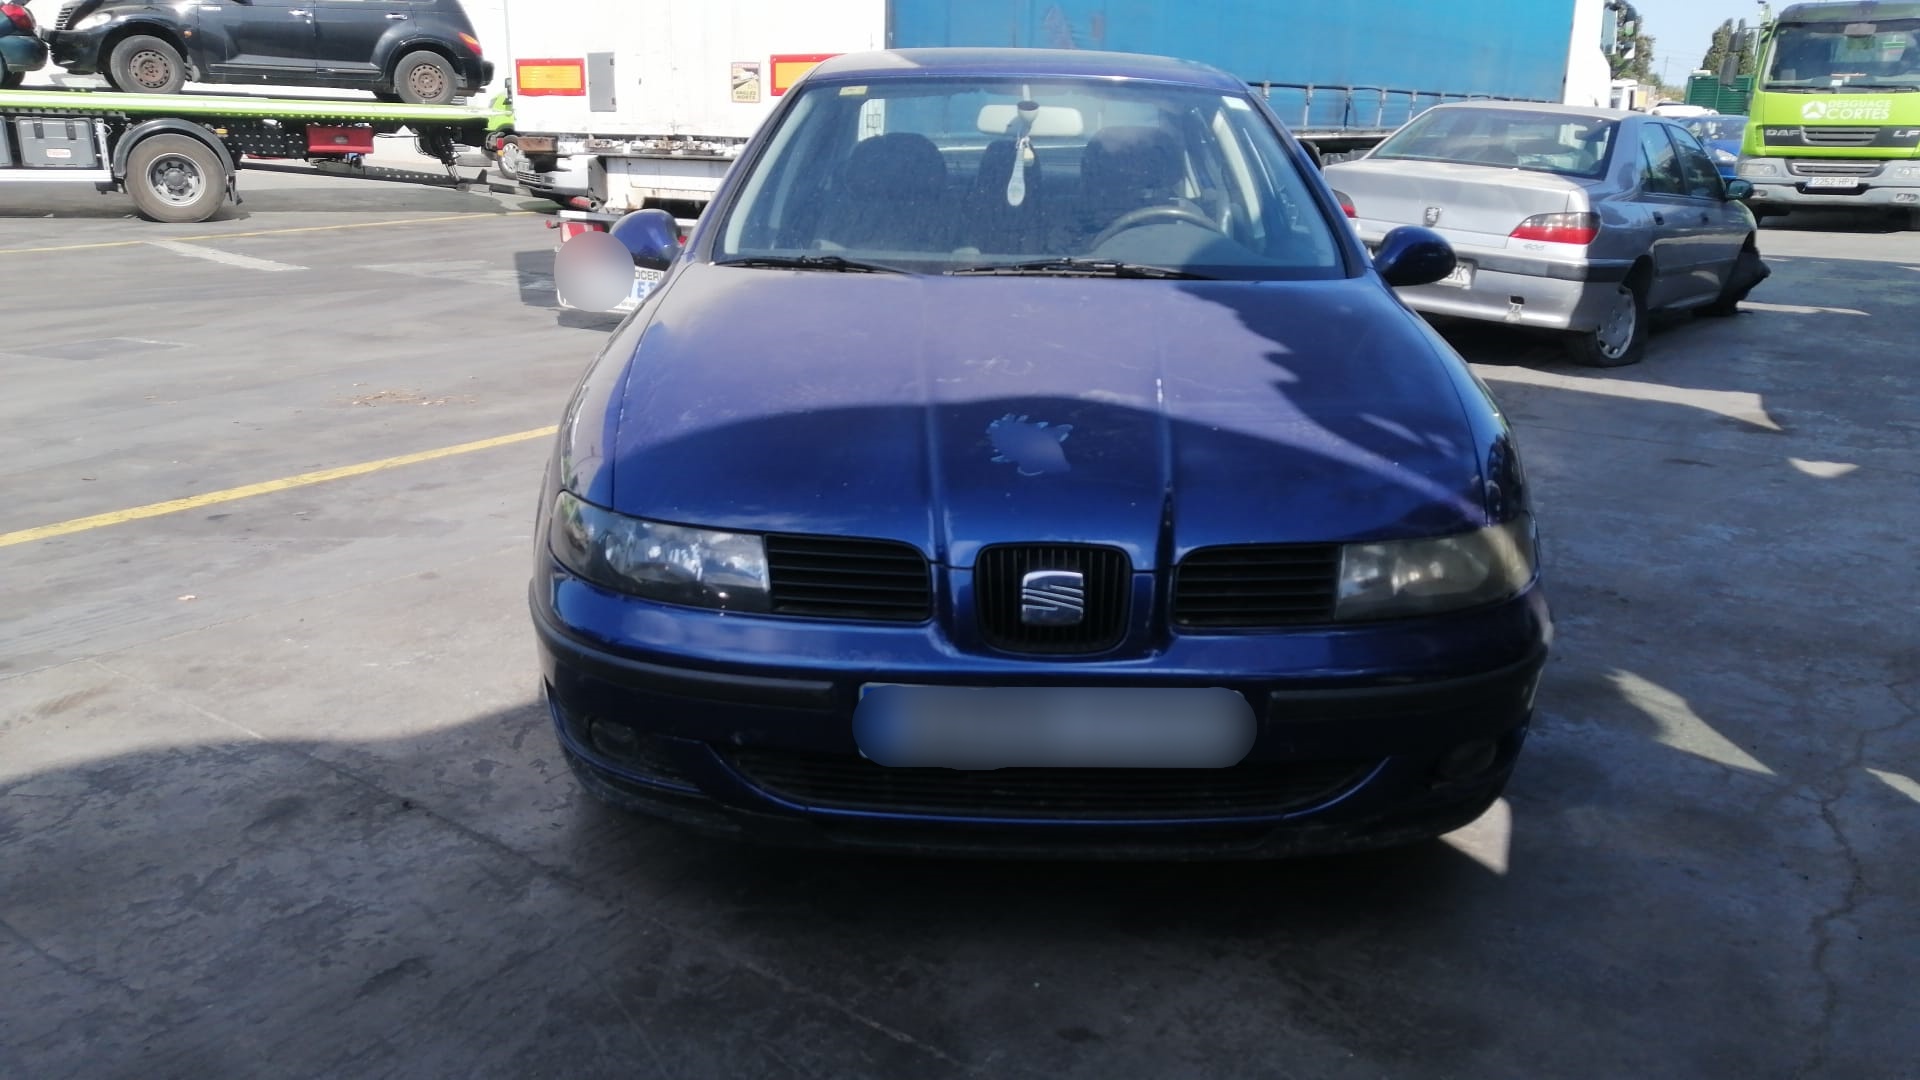 SEAT Toledo 2 generation (1999-2006) Other part 1J0907655A 25202370